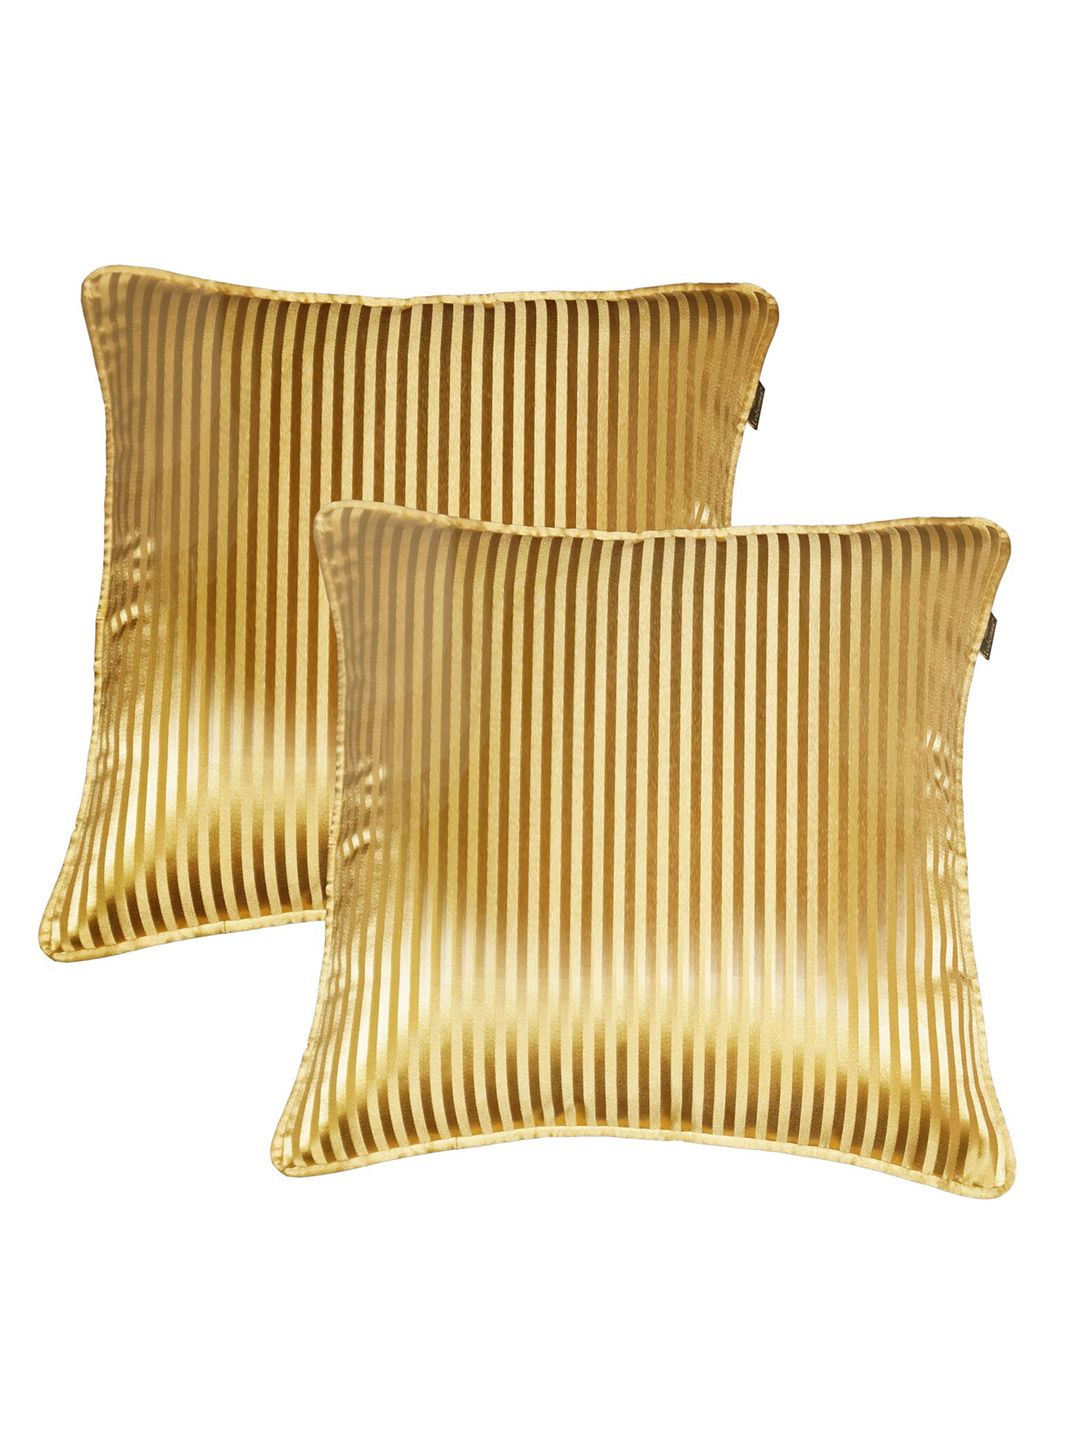 Lushomes Gold-Toned Pack of 2 Striped Square Cushion Covers Price in India